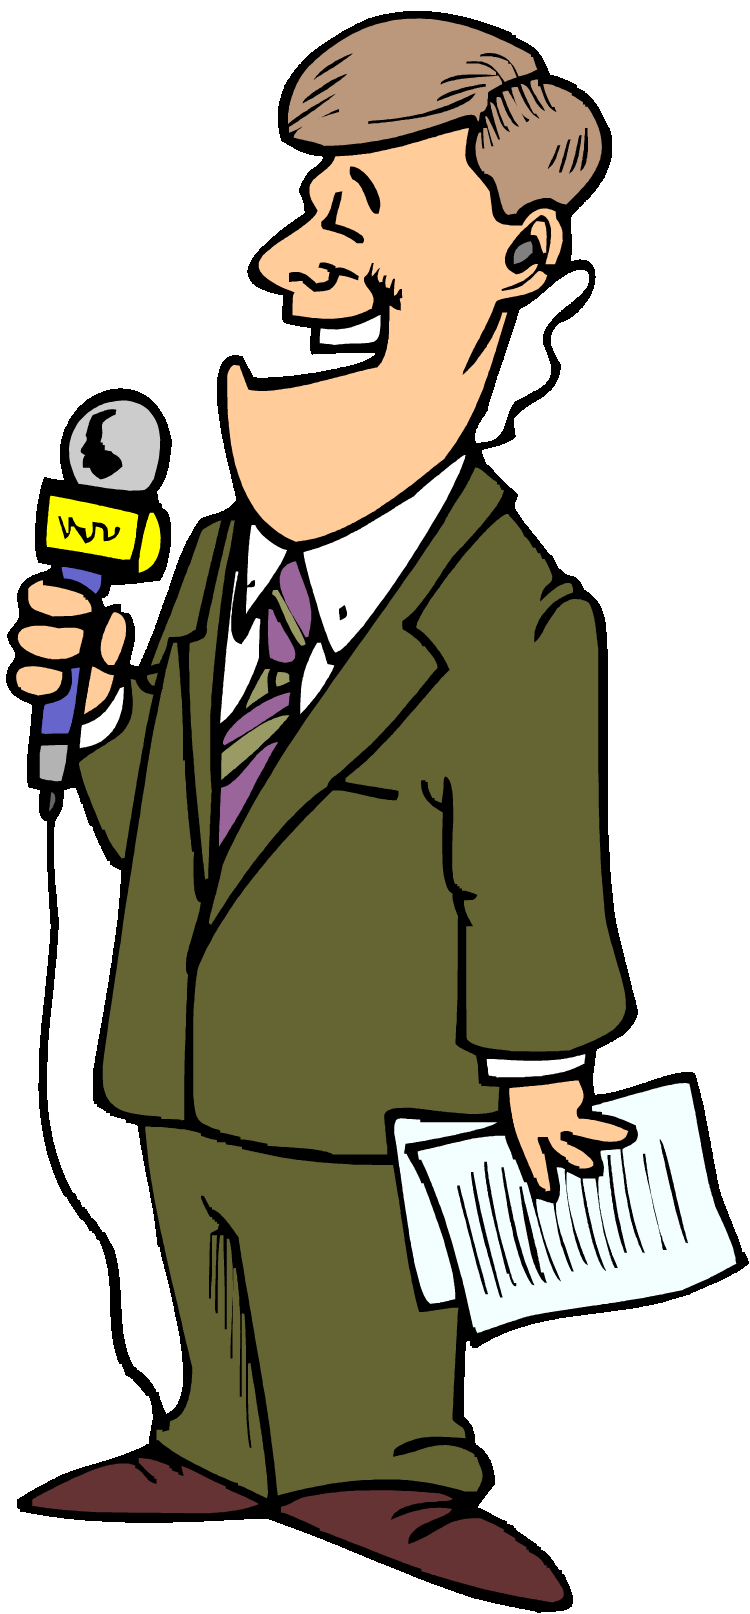 News Anchor Clipart - Gallery